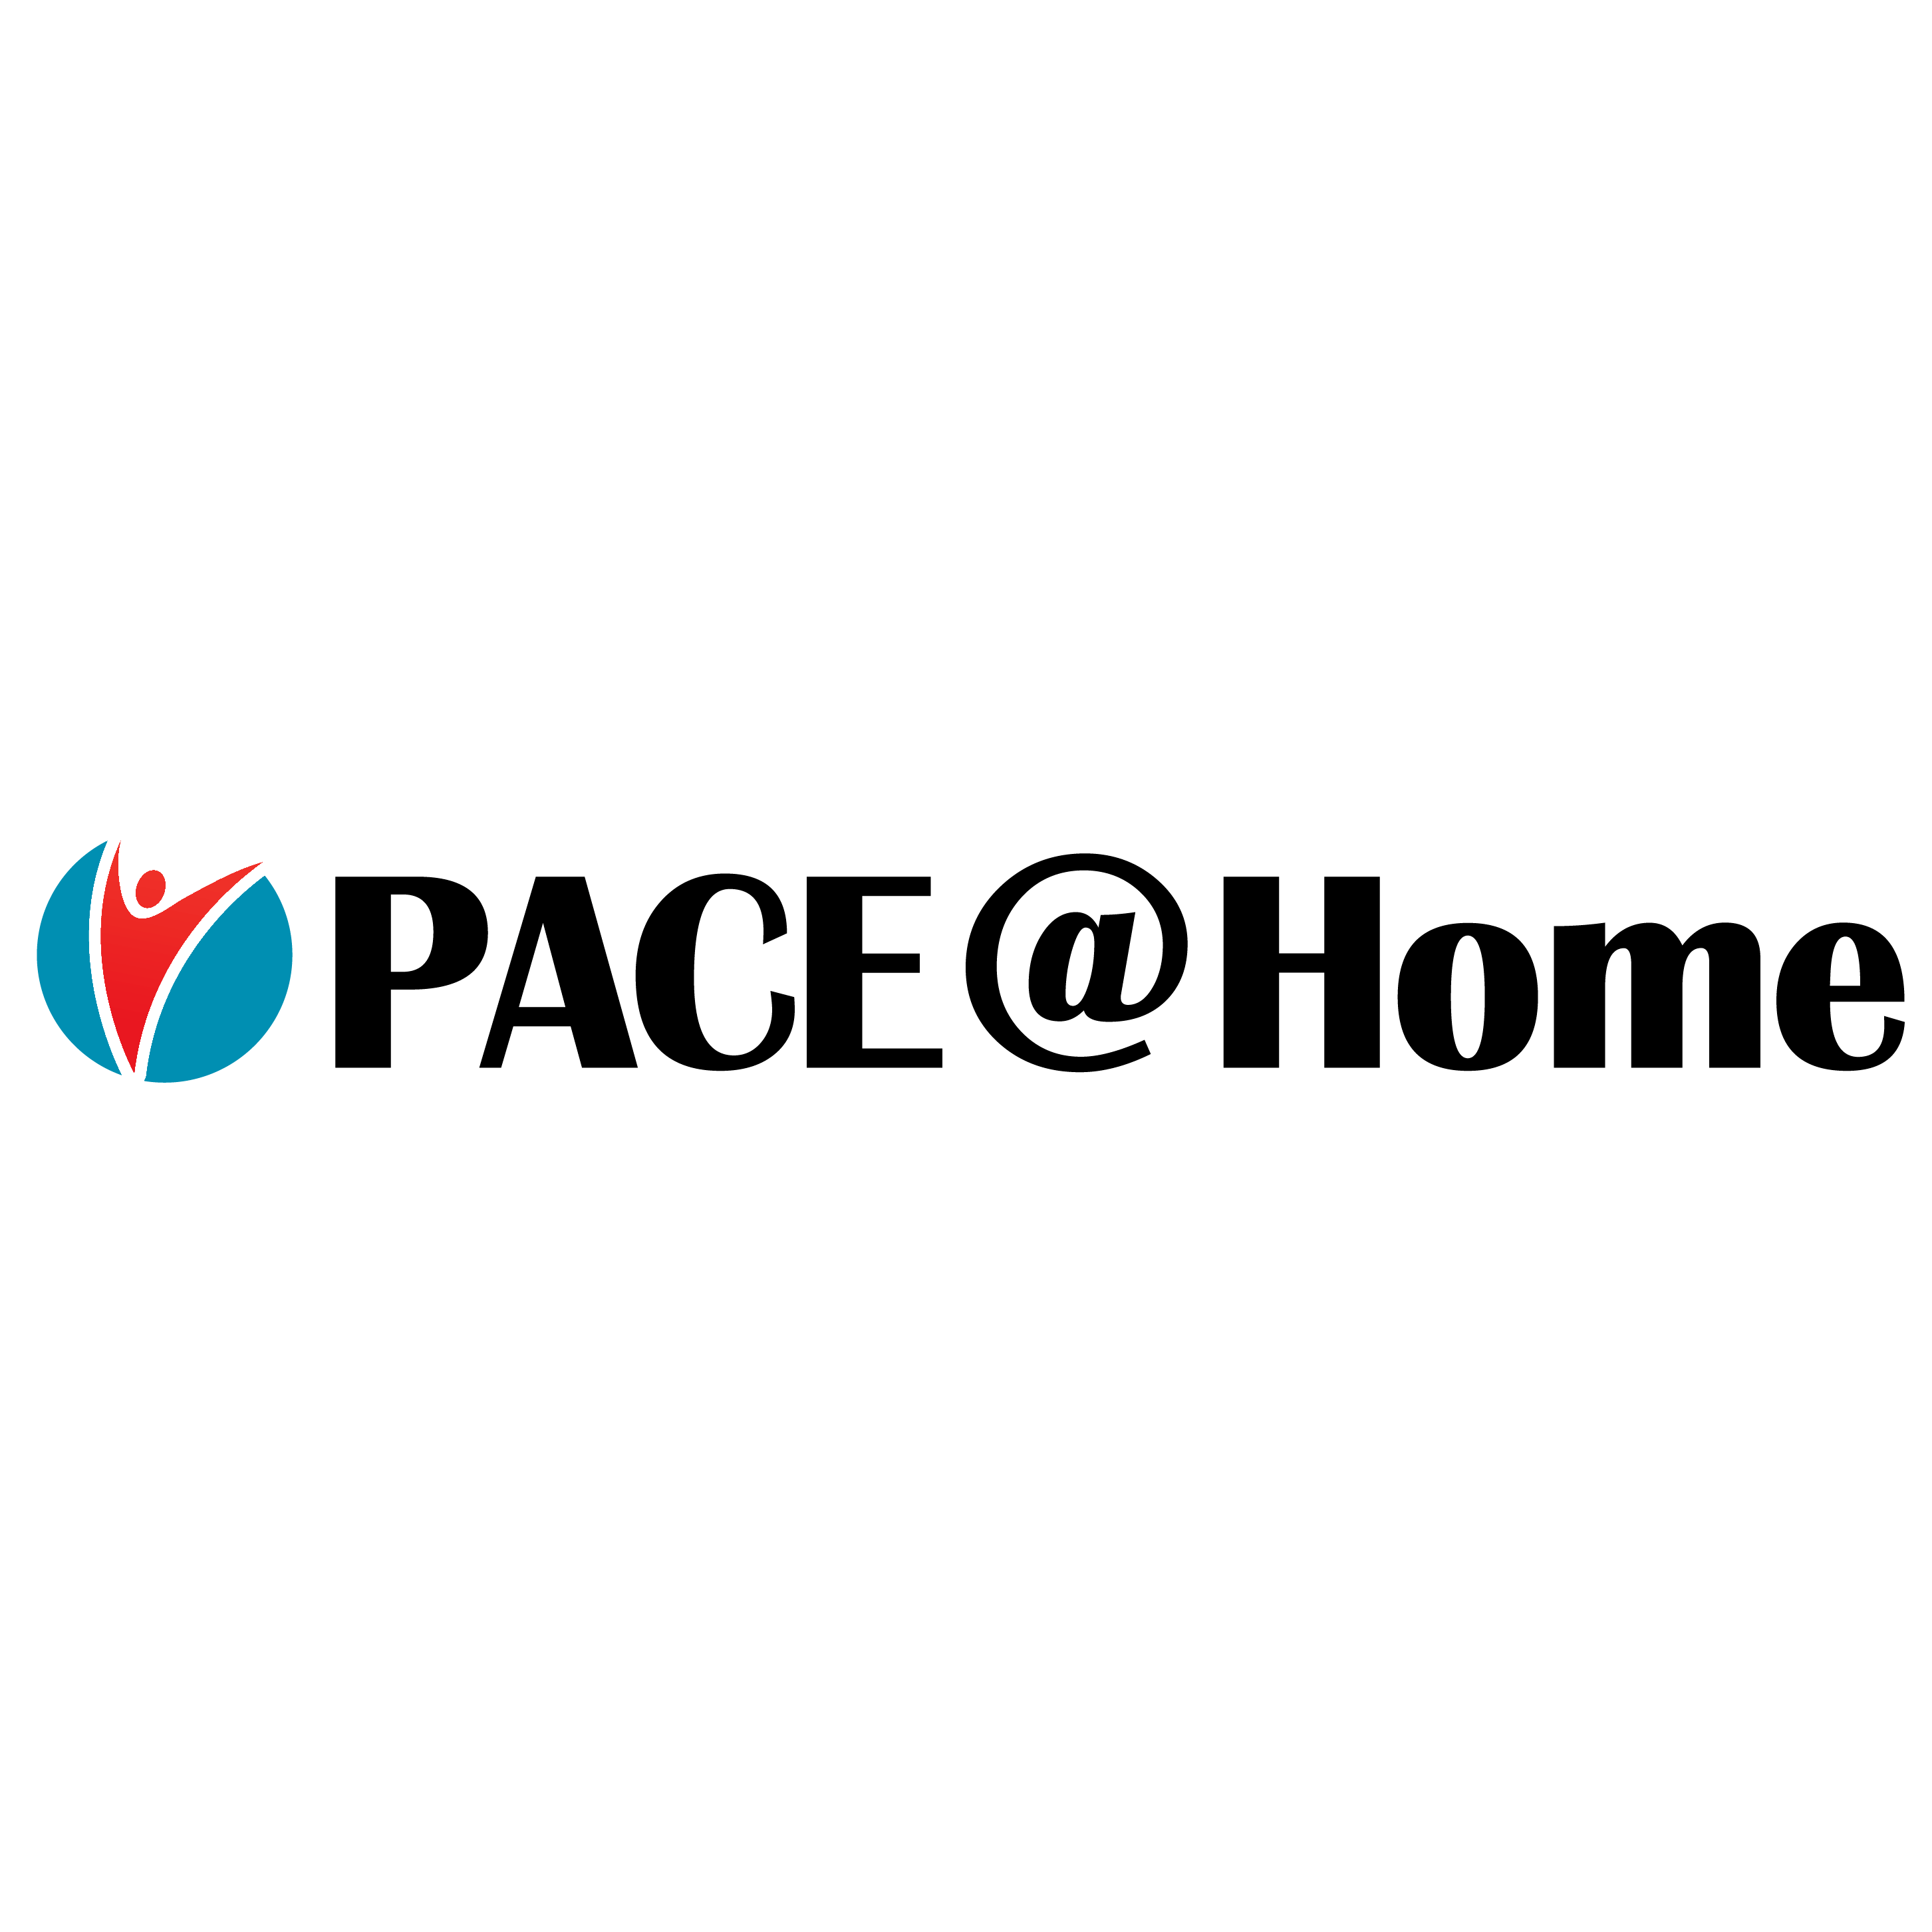 PACE@Home